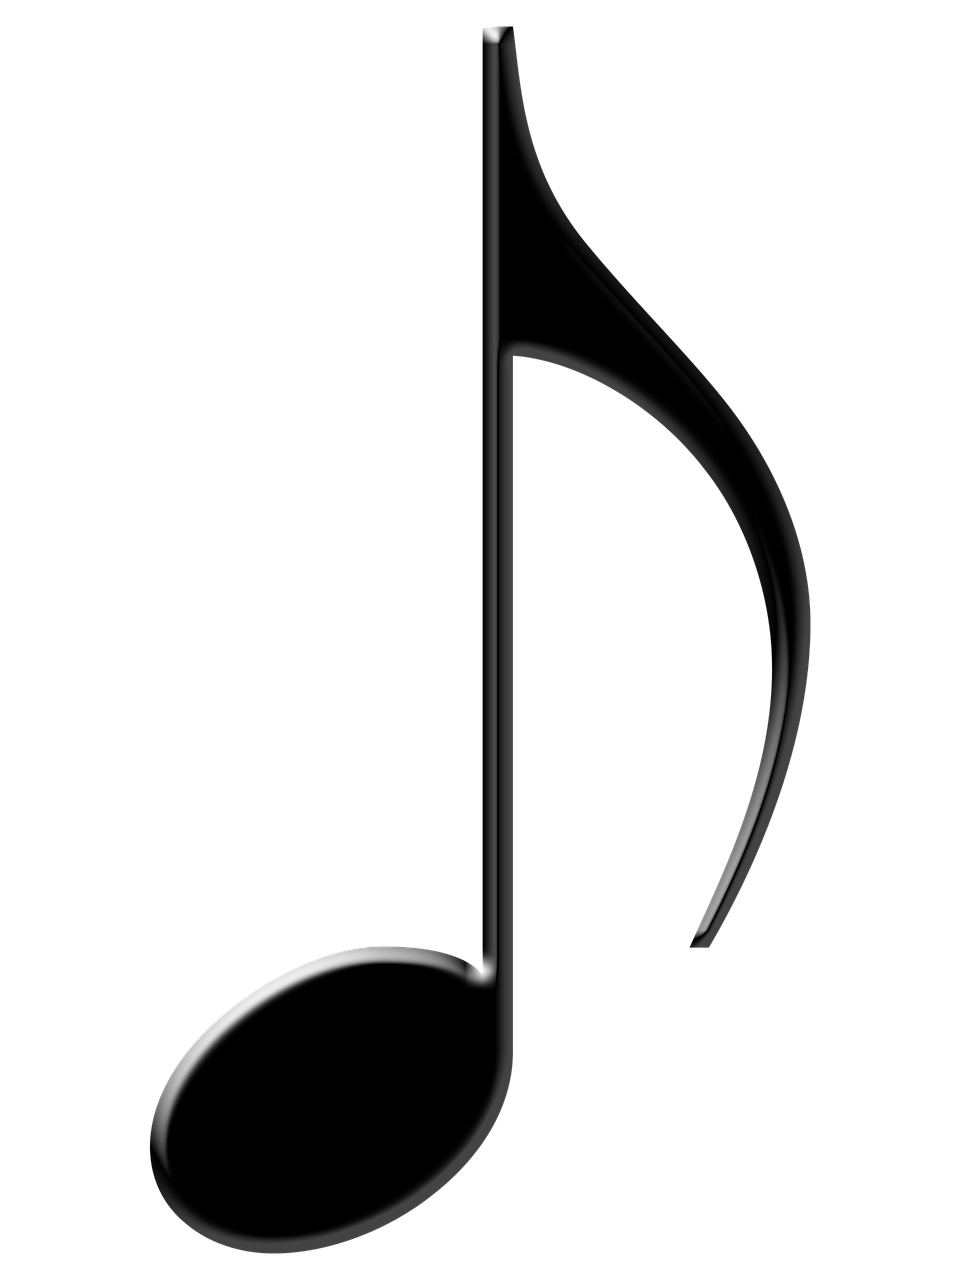 musical notes music staff free photo